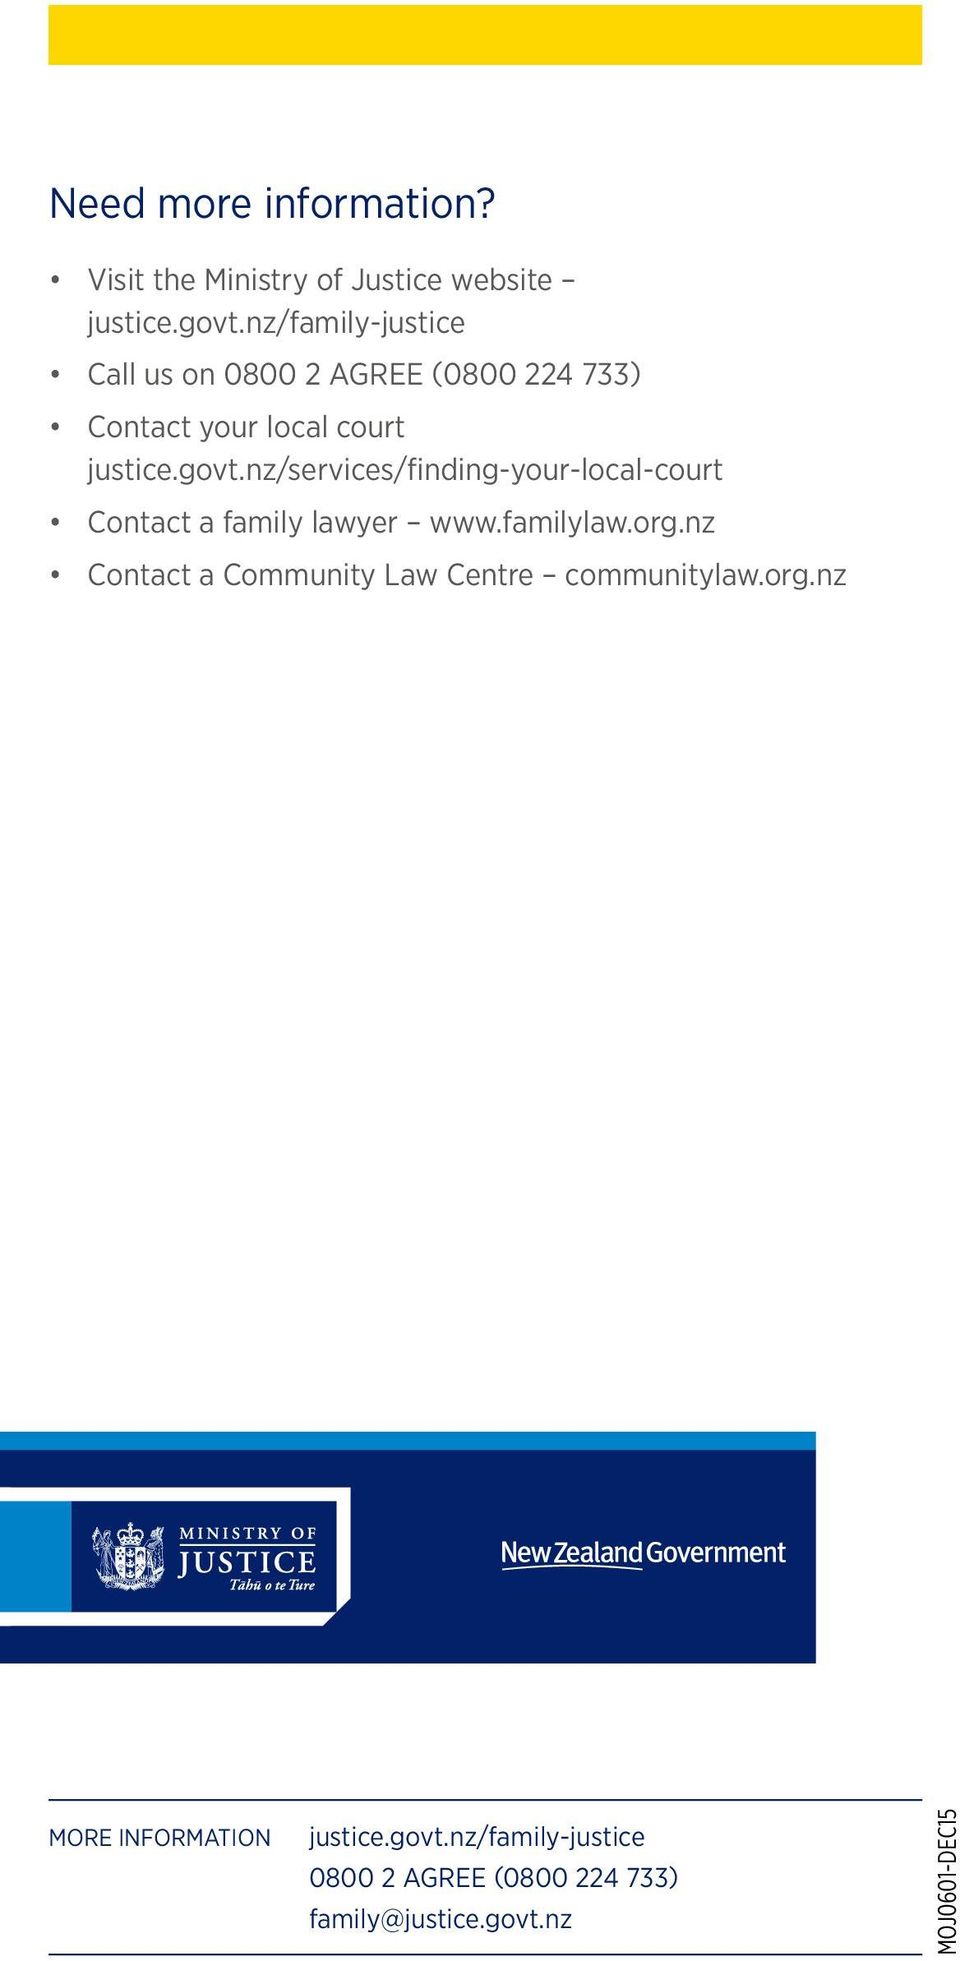 nz/services/finding-your-local-court Contact a family lawyer www.familylaw.org.